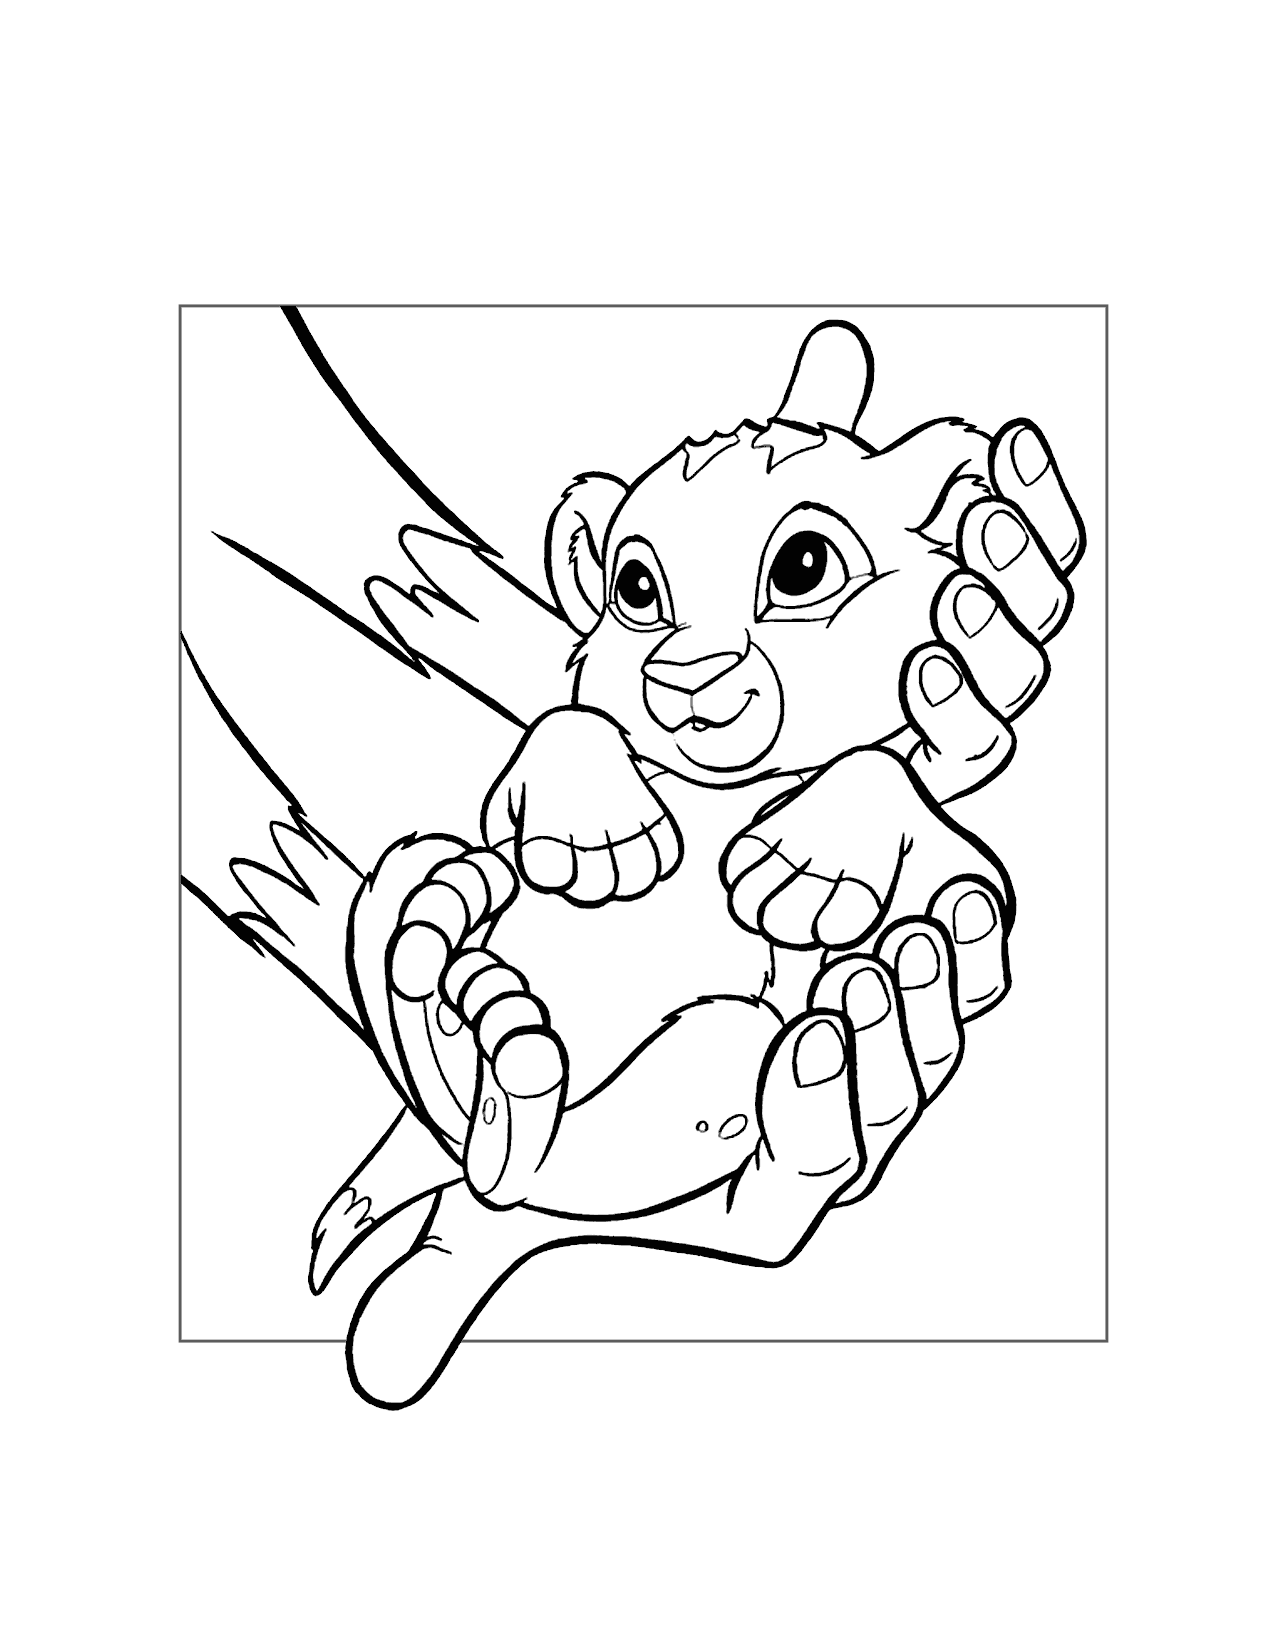 Litte Baby Simba Coloring Page